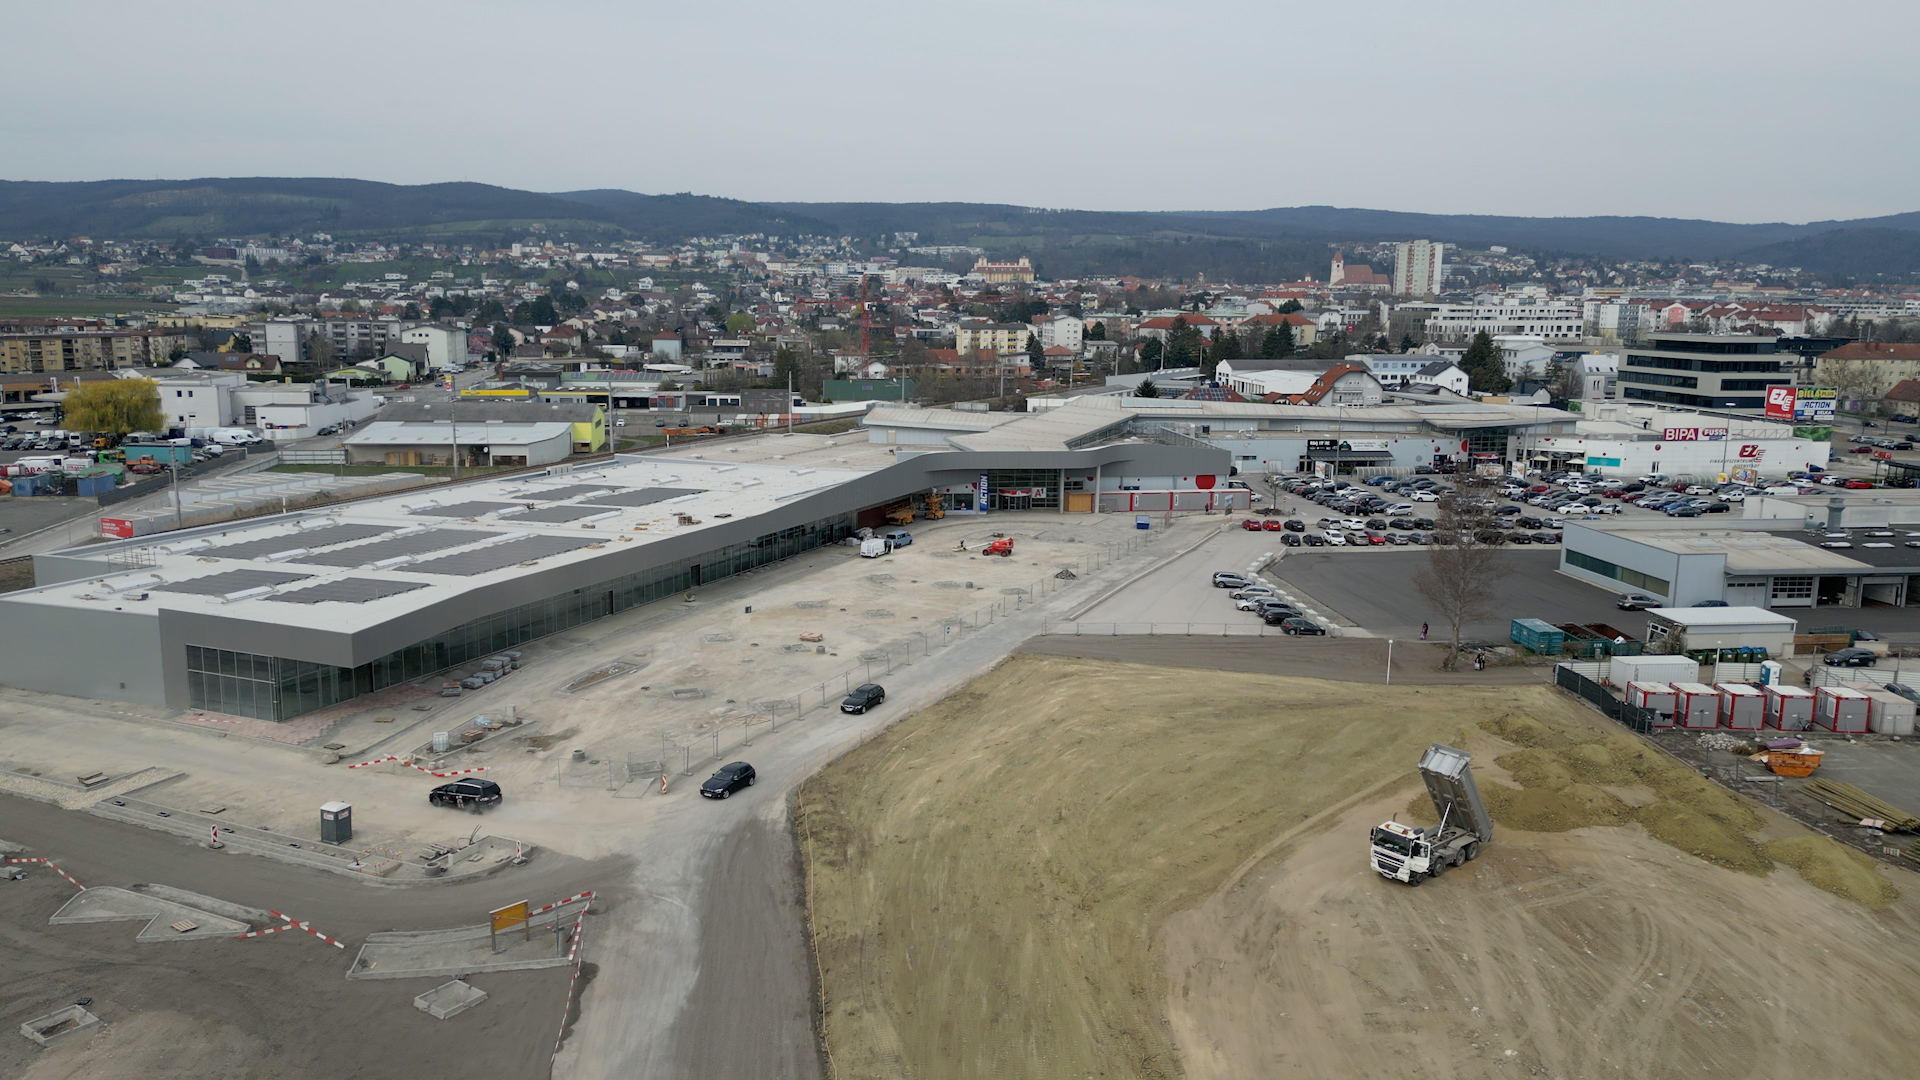 While Eisenstadt's old town has been revitalized, new shopping malls are being built on the outskirts of the town./MediaWorks/CGTN